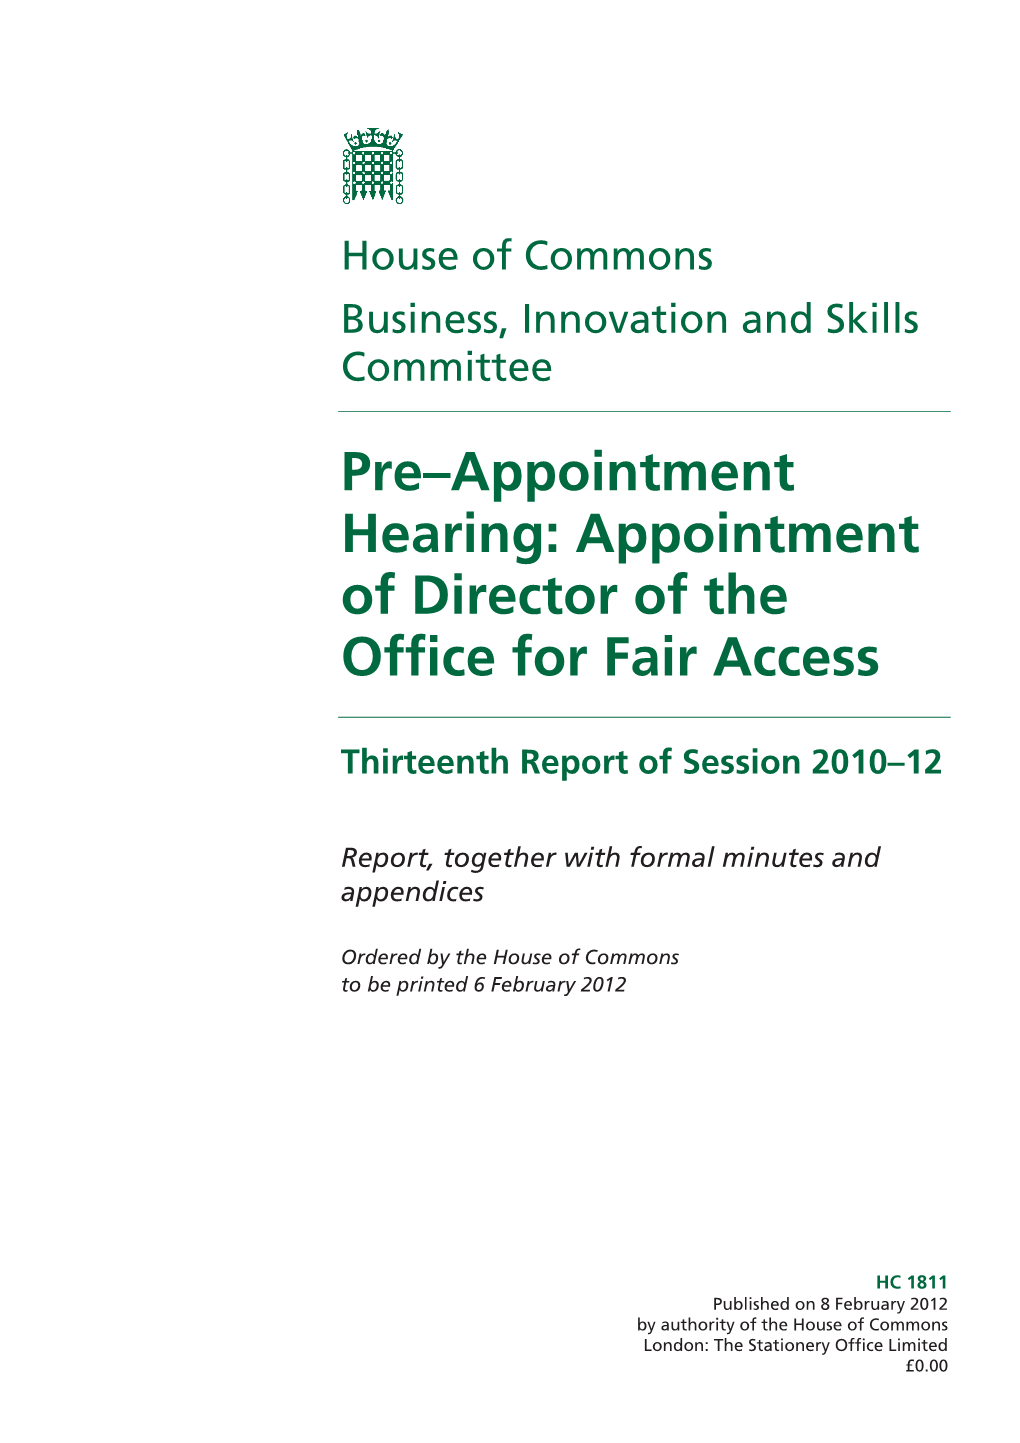 Appointment of Director of the Office for Fair Access